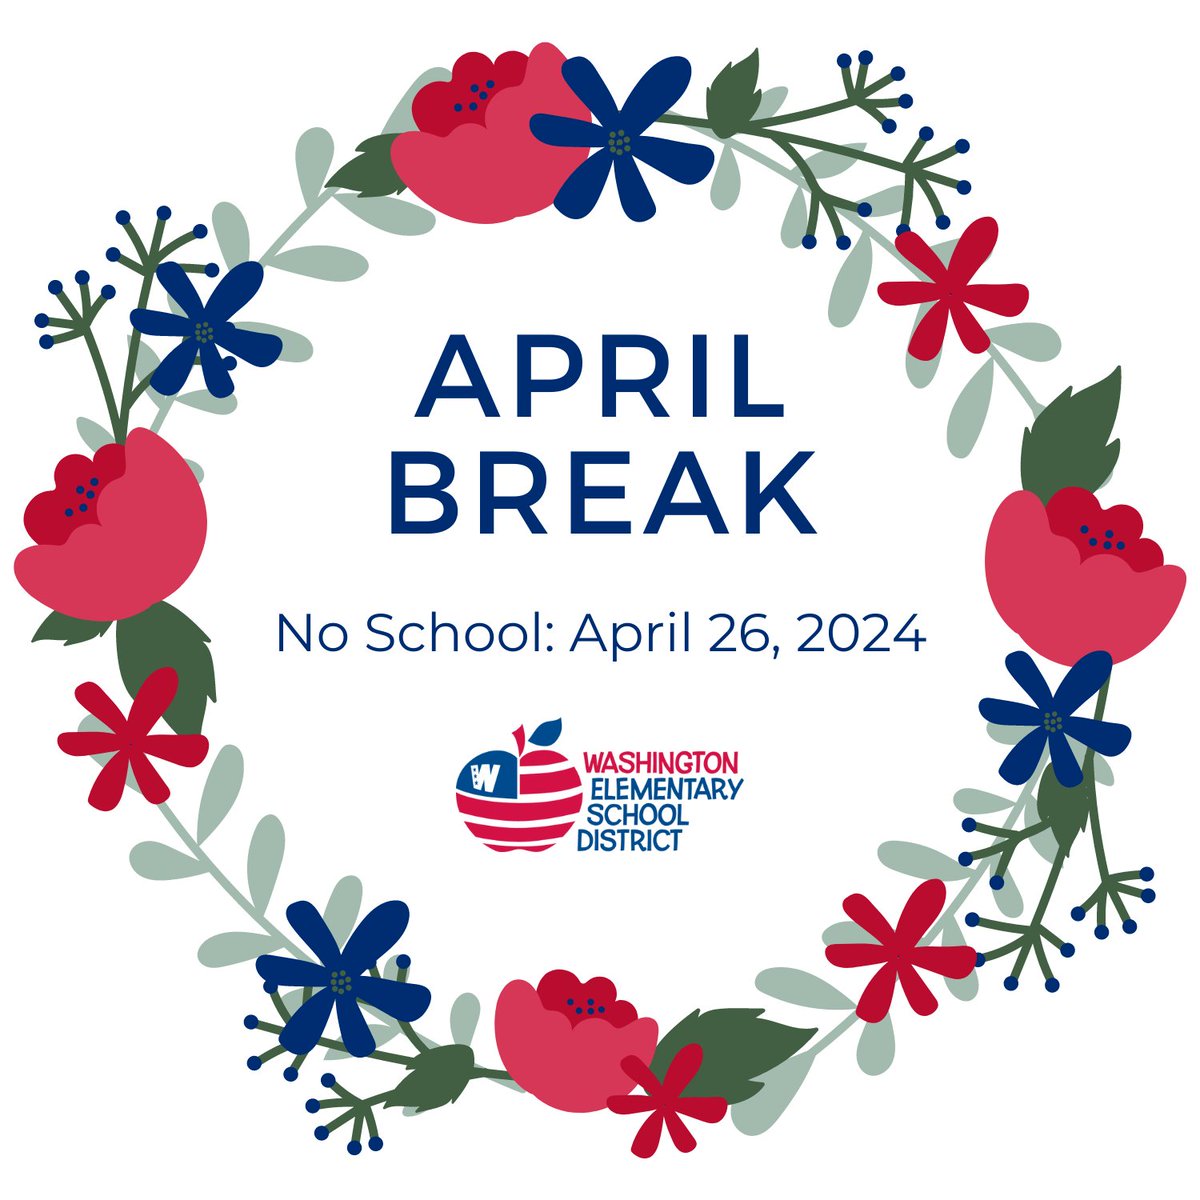 Attention, #WESDFamily! This is a friendly reminder that there will be no school tomorrow, April 26, due to April break. All school and district offices will also be closed. School and regular business hours will resume on Monday, April 29. We hope you enjoy your day off!